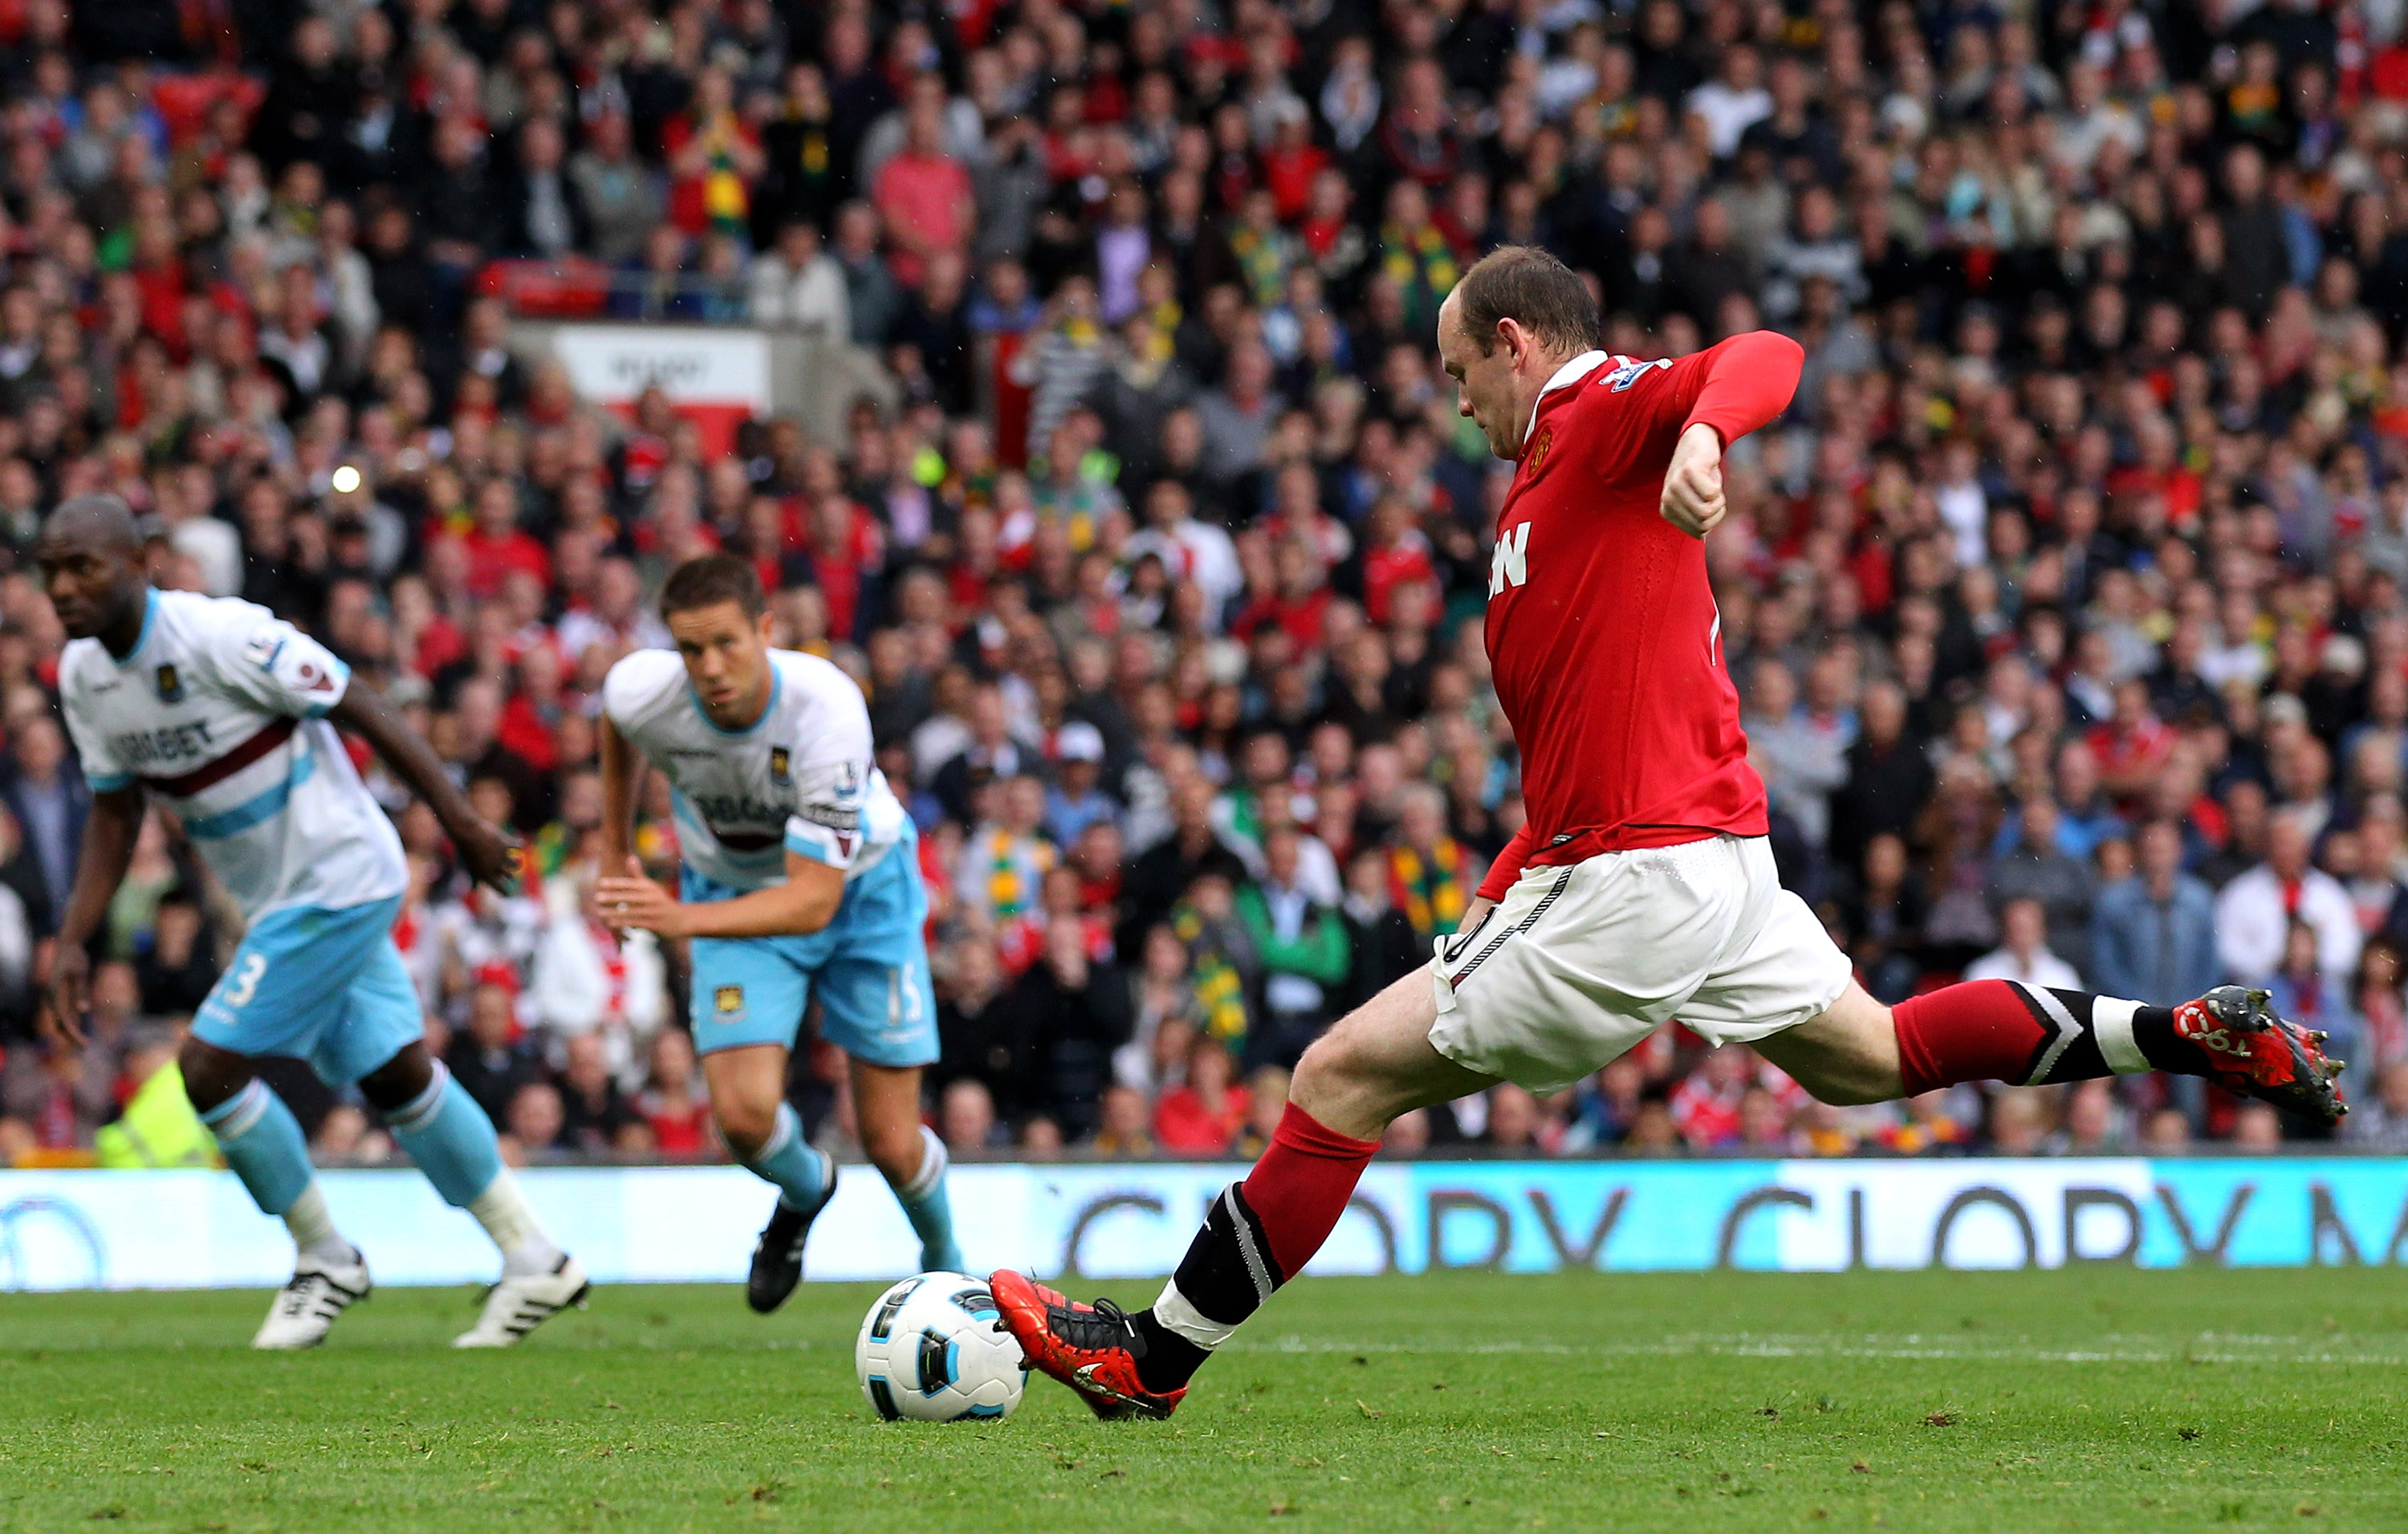 MANCHESTER, ENGLAND - AUGUST 28:  Wayne Rooney of Manchester United scores the opening goal from the penalty spot during the Barclays Premier League match between Manchester United and West Ham United at Old Trafford on August 28, 2010 in Manchester, Engl